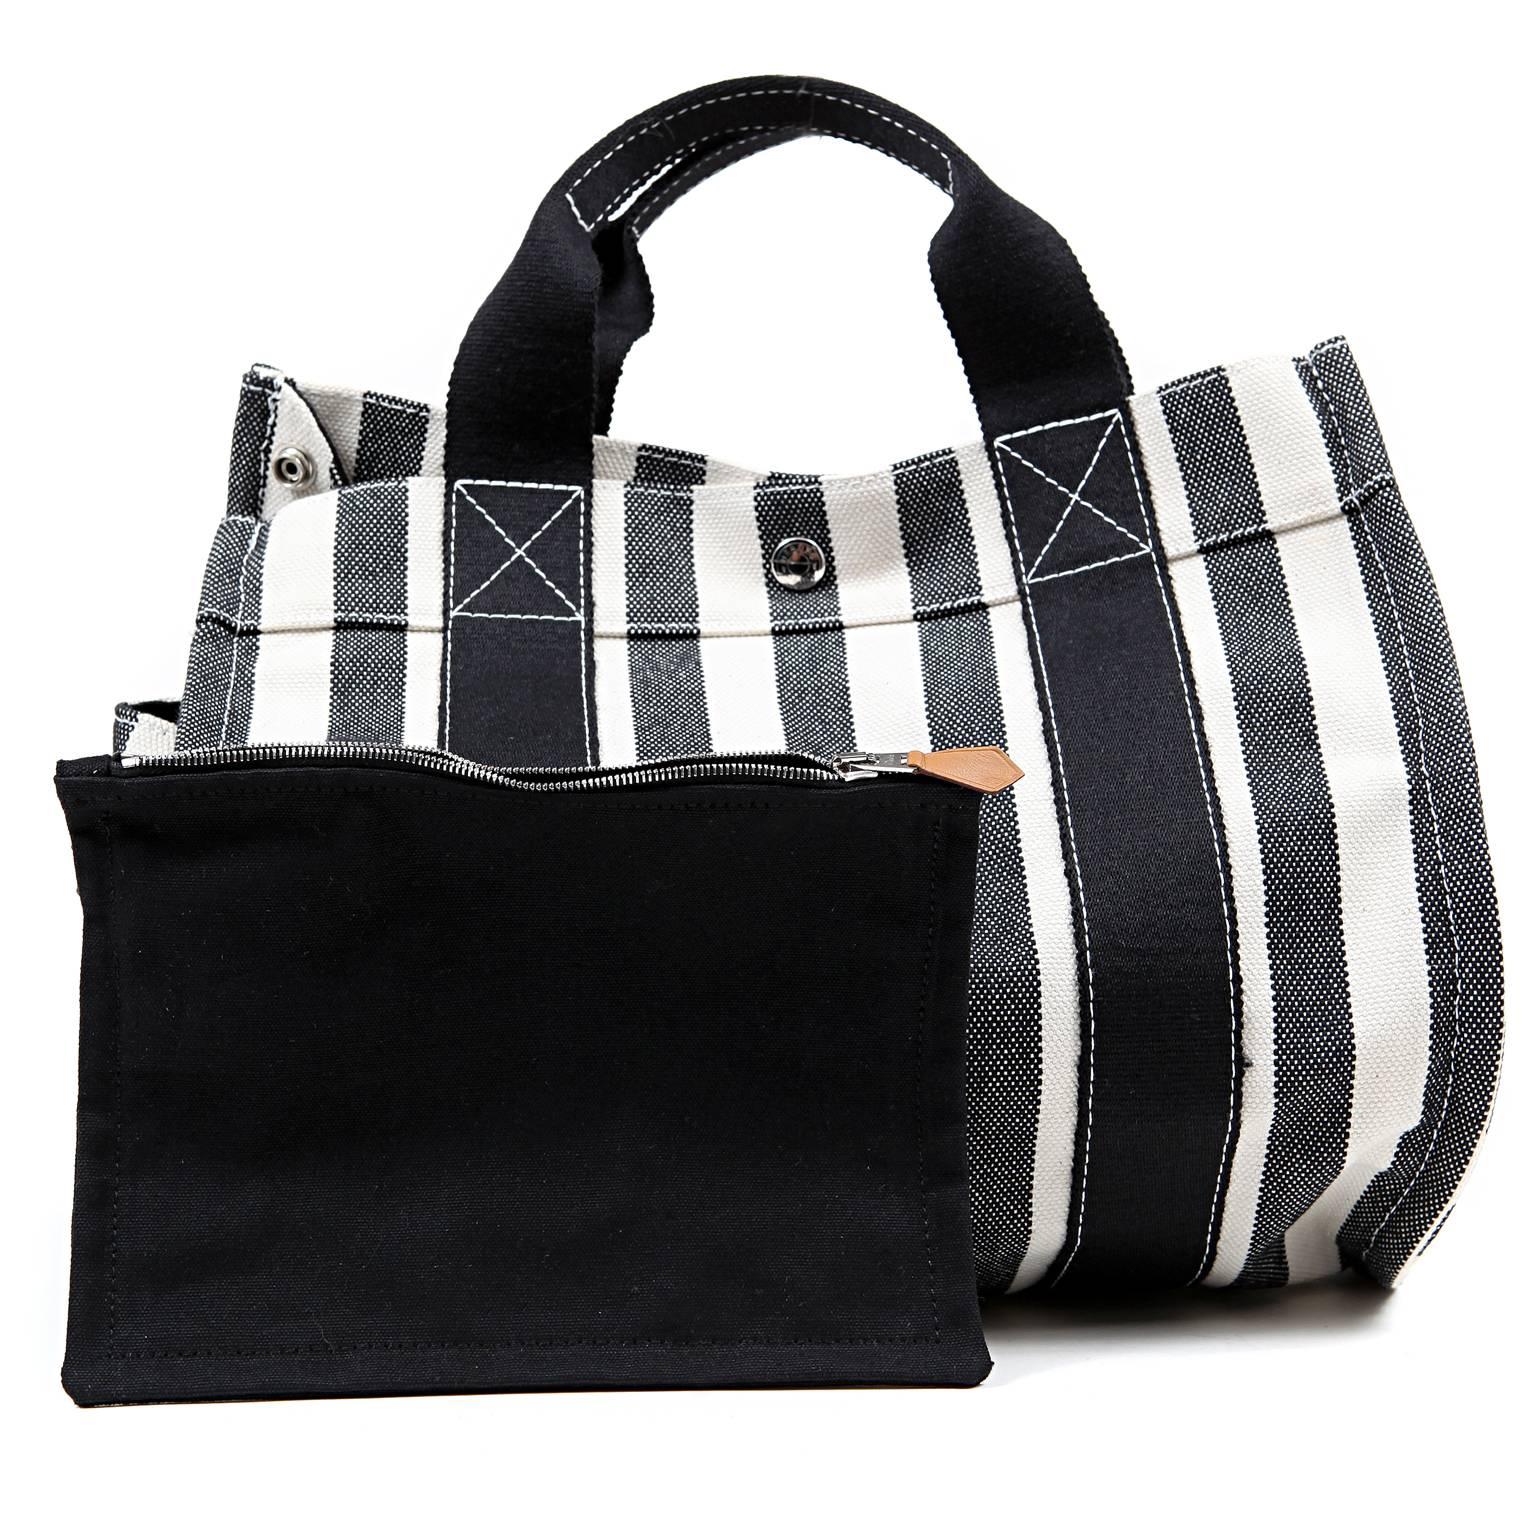 Hermes Black and White Striped Canvas Tote with pochette For Sale 4